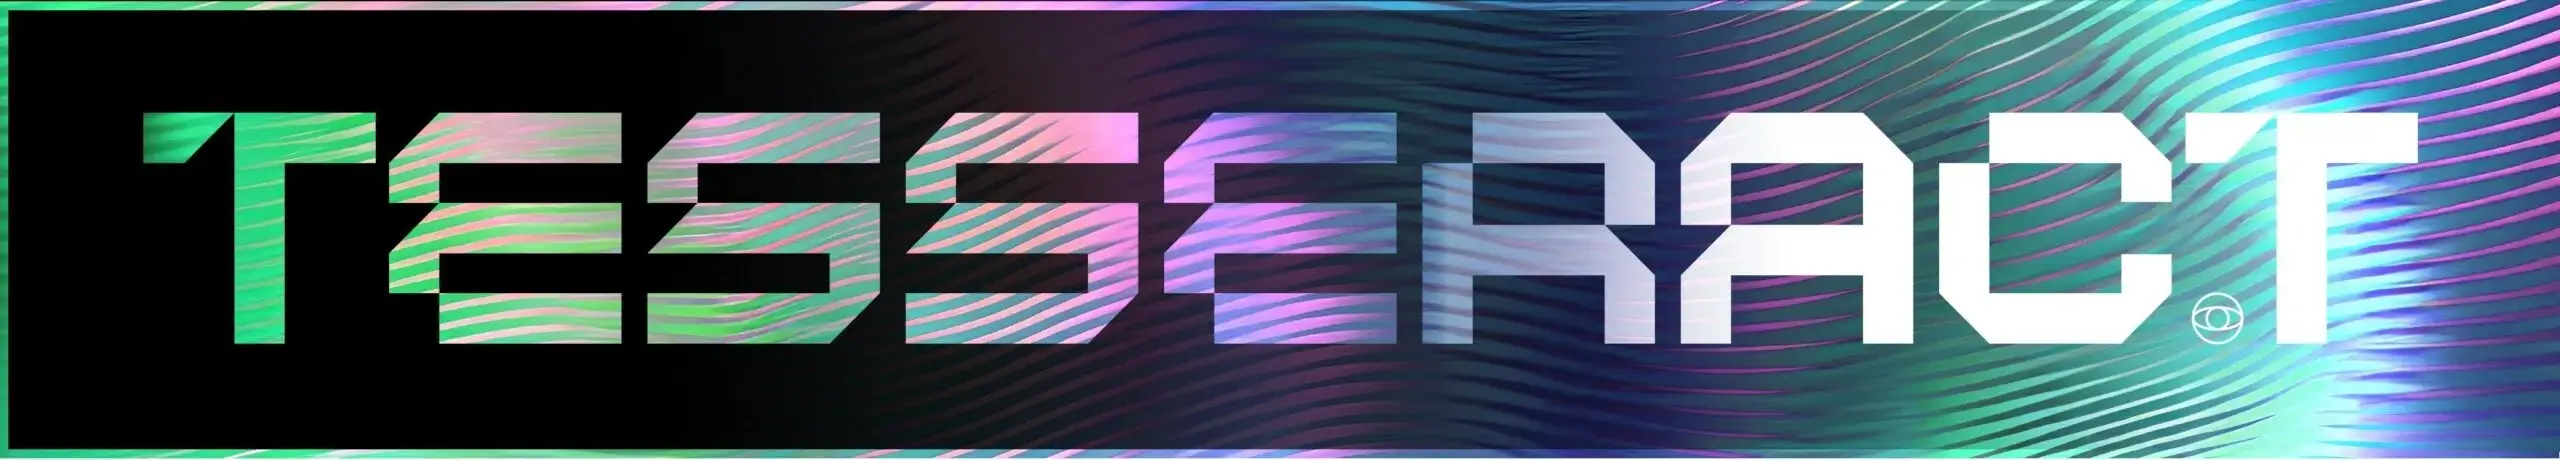 Tesseract text on a background with a bright color gradient